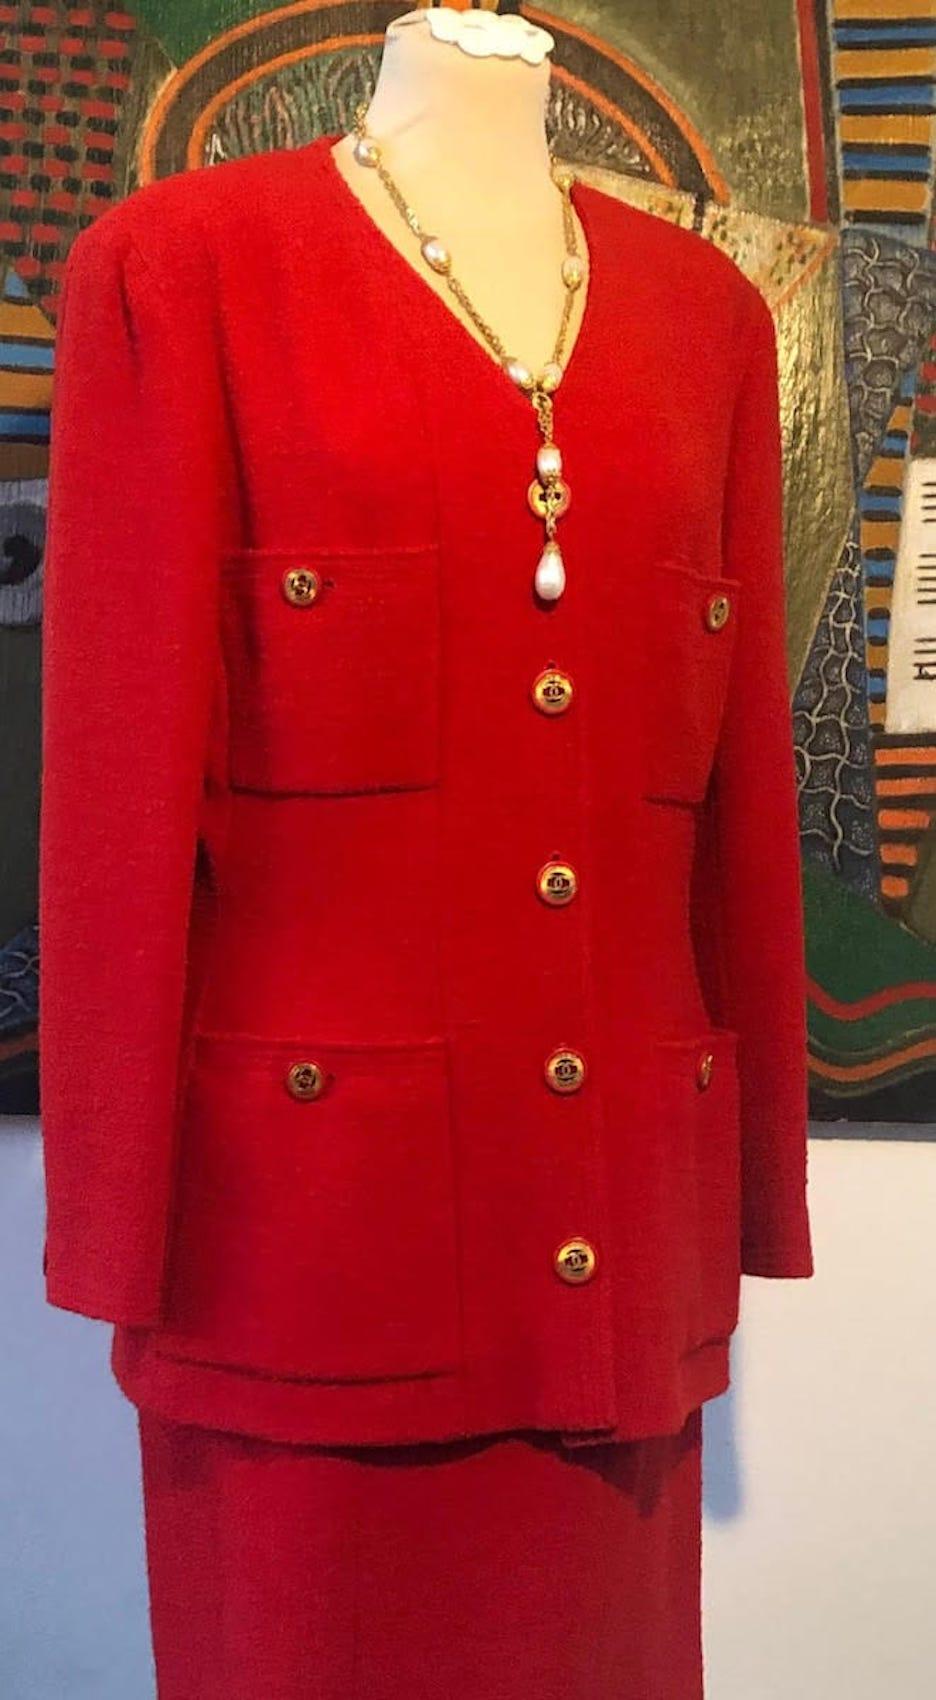 CHANEL 1990s CC-Buttons Single-Breasted Jacket Suit Red Tweed Bouclé
A classic rare CHANEL red bouclé skirt suit, from 1990s Collection 29 with stunning buttons (the buttons looks like Chanel earrings). A single-breasted V-neck collar jacket with